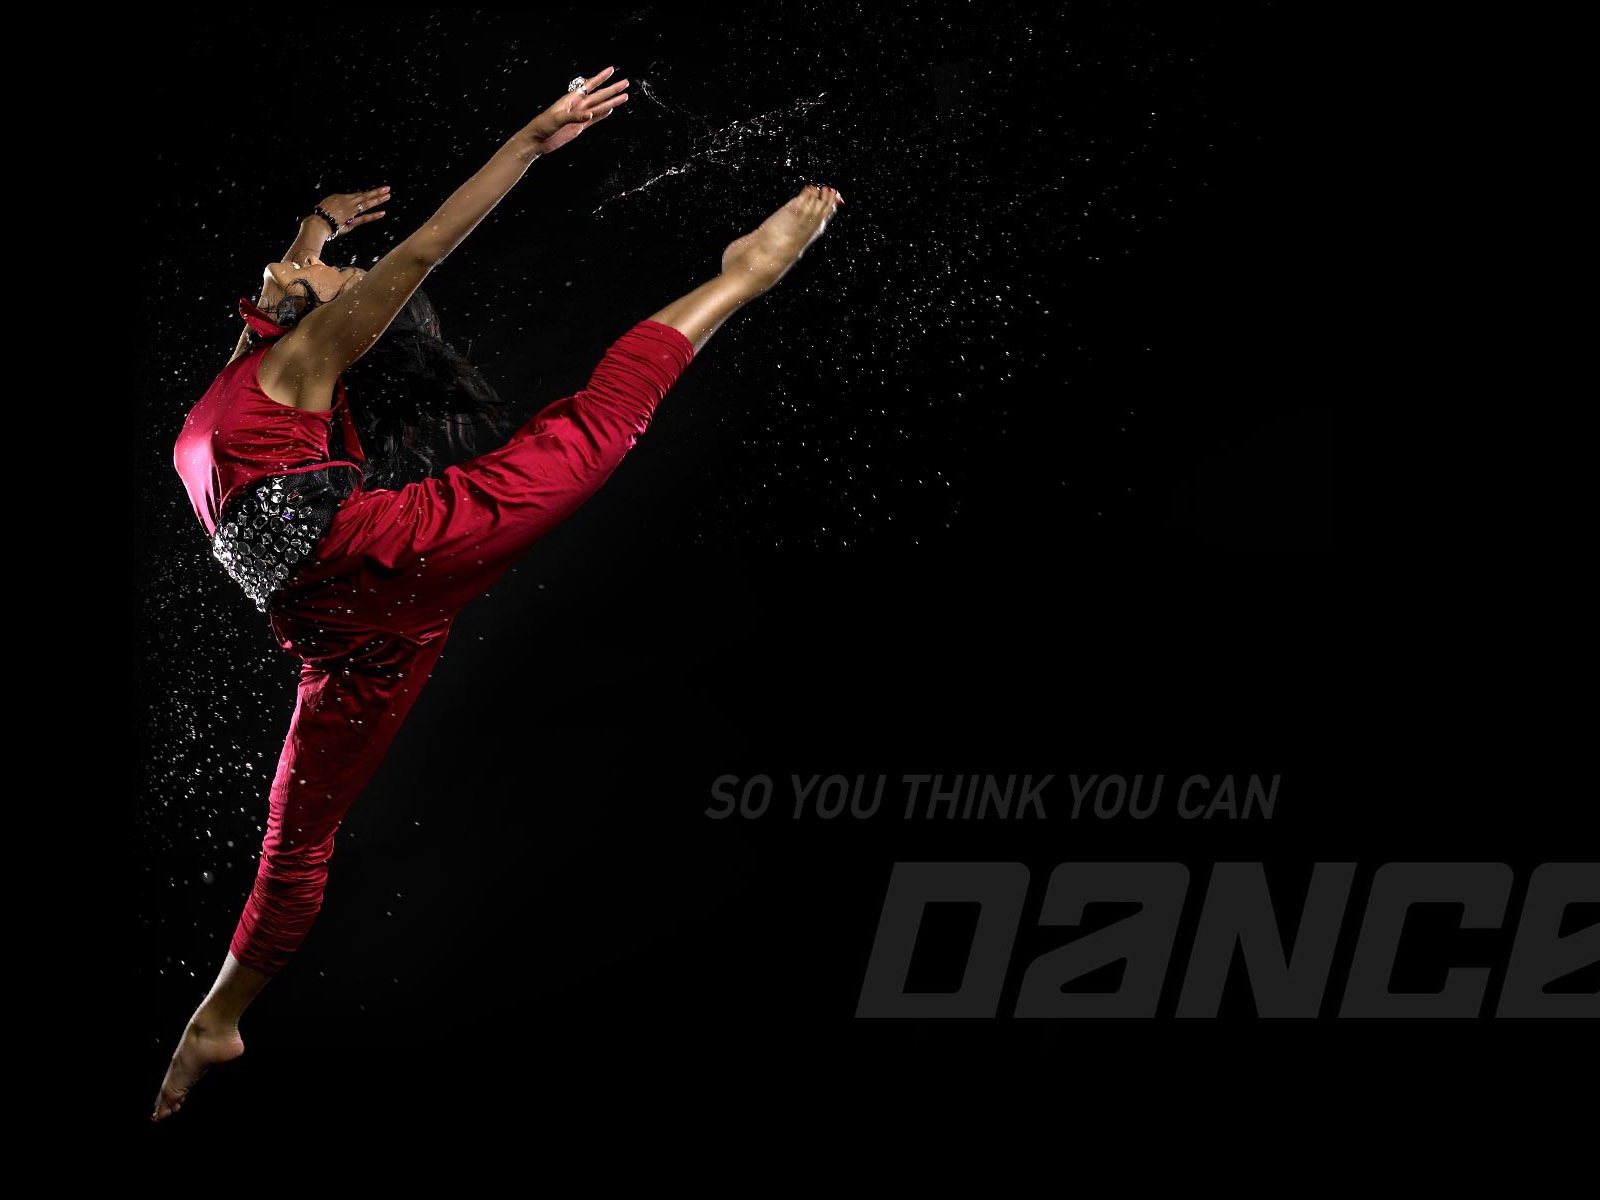 So You Think You Can Dance wallpaper (1) #9 - 1600x1200